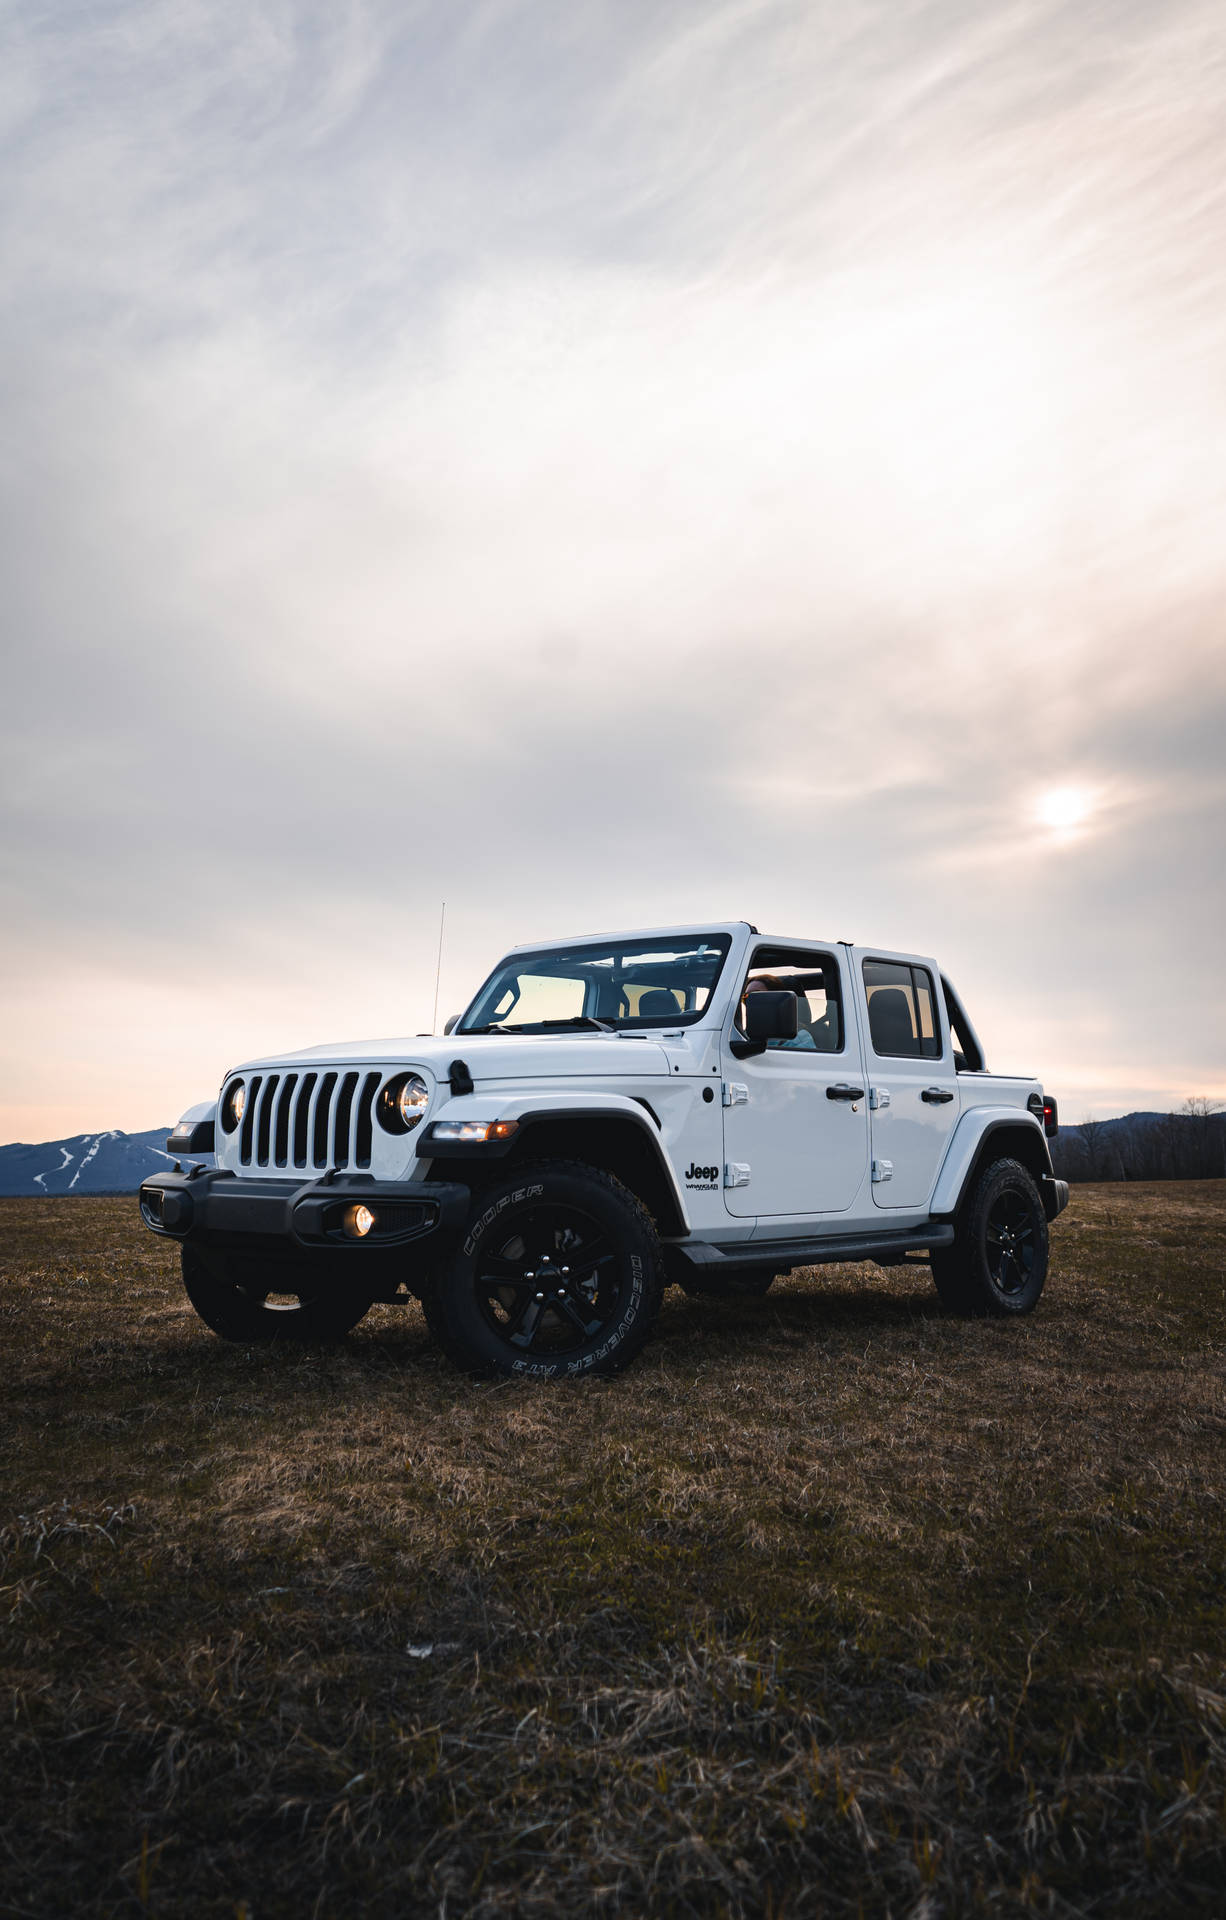 Free Jeep Background Photos, [100+] Jeep Background for FREE | Wallpapers .com